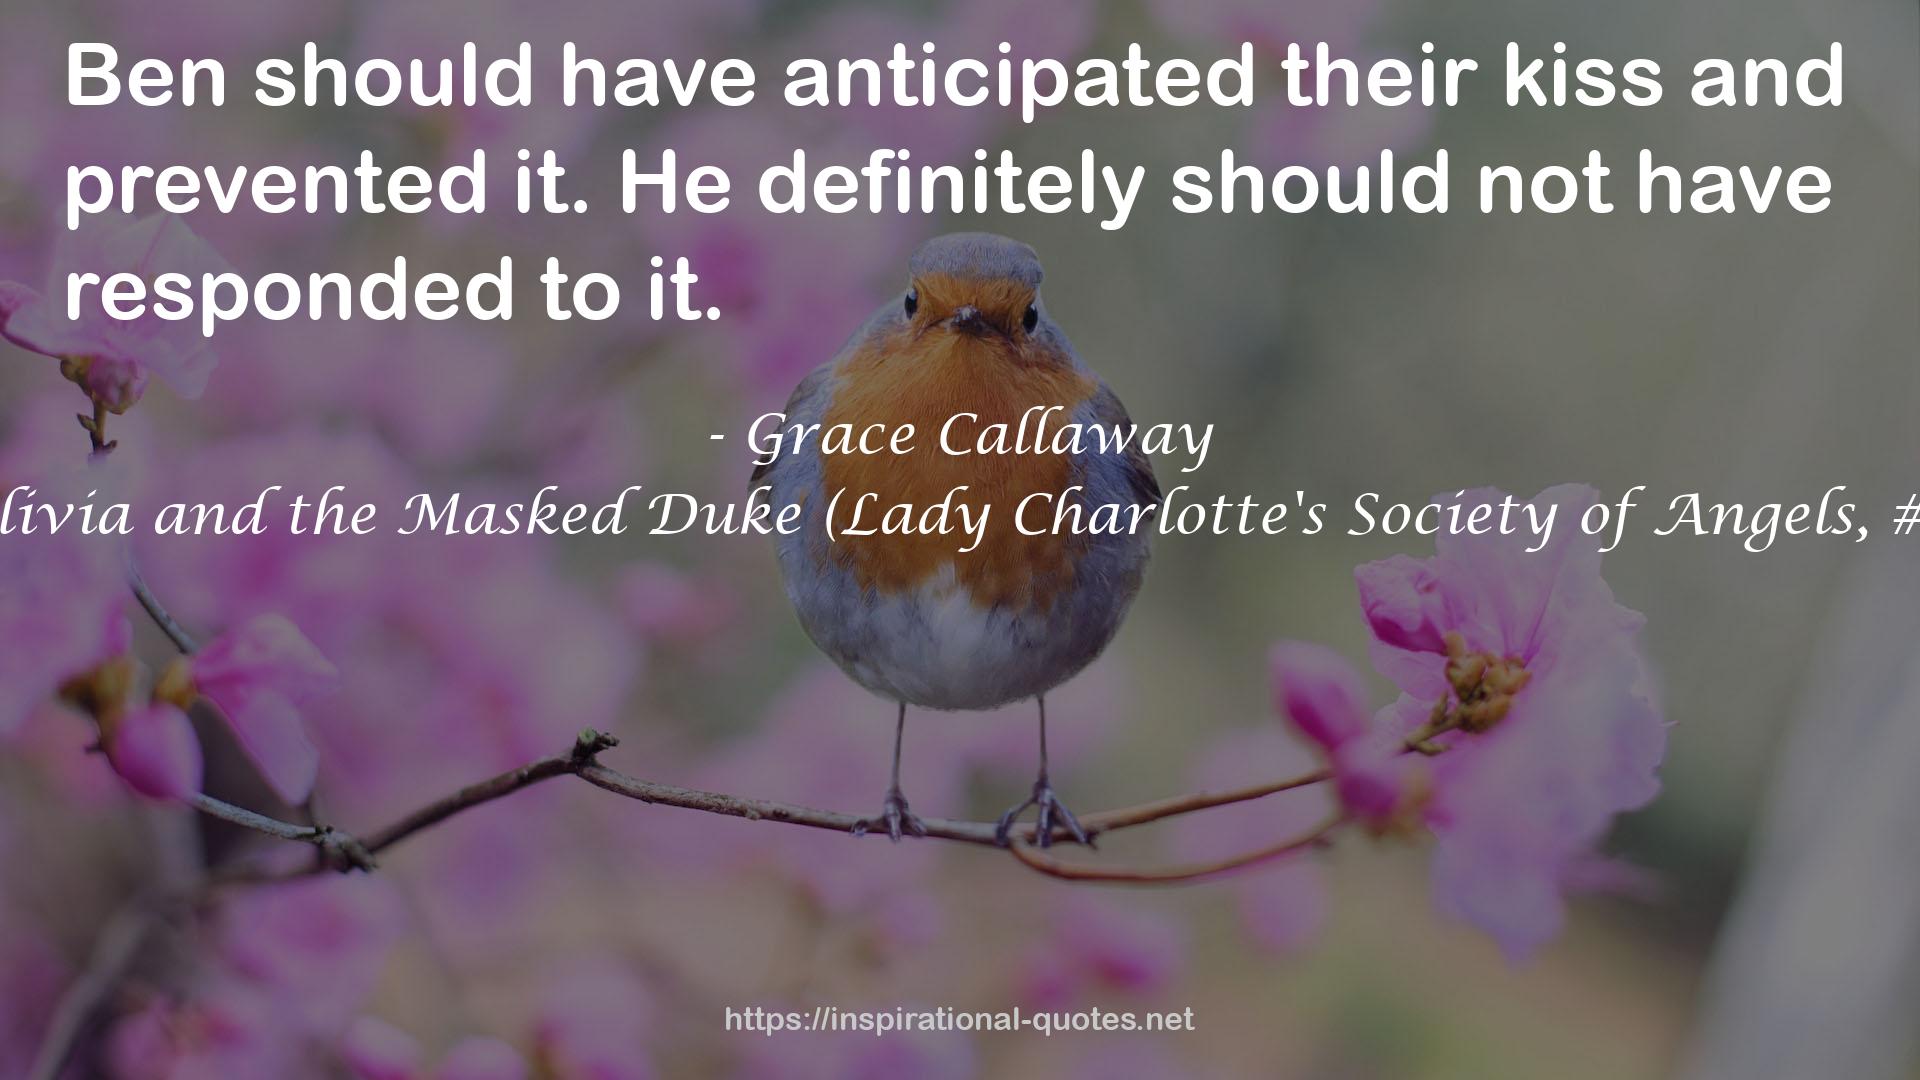 Olivia and the Masked Duke (Lady Charlotte's Society of Angels, #1) QUOTES